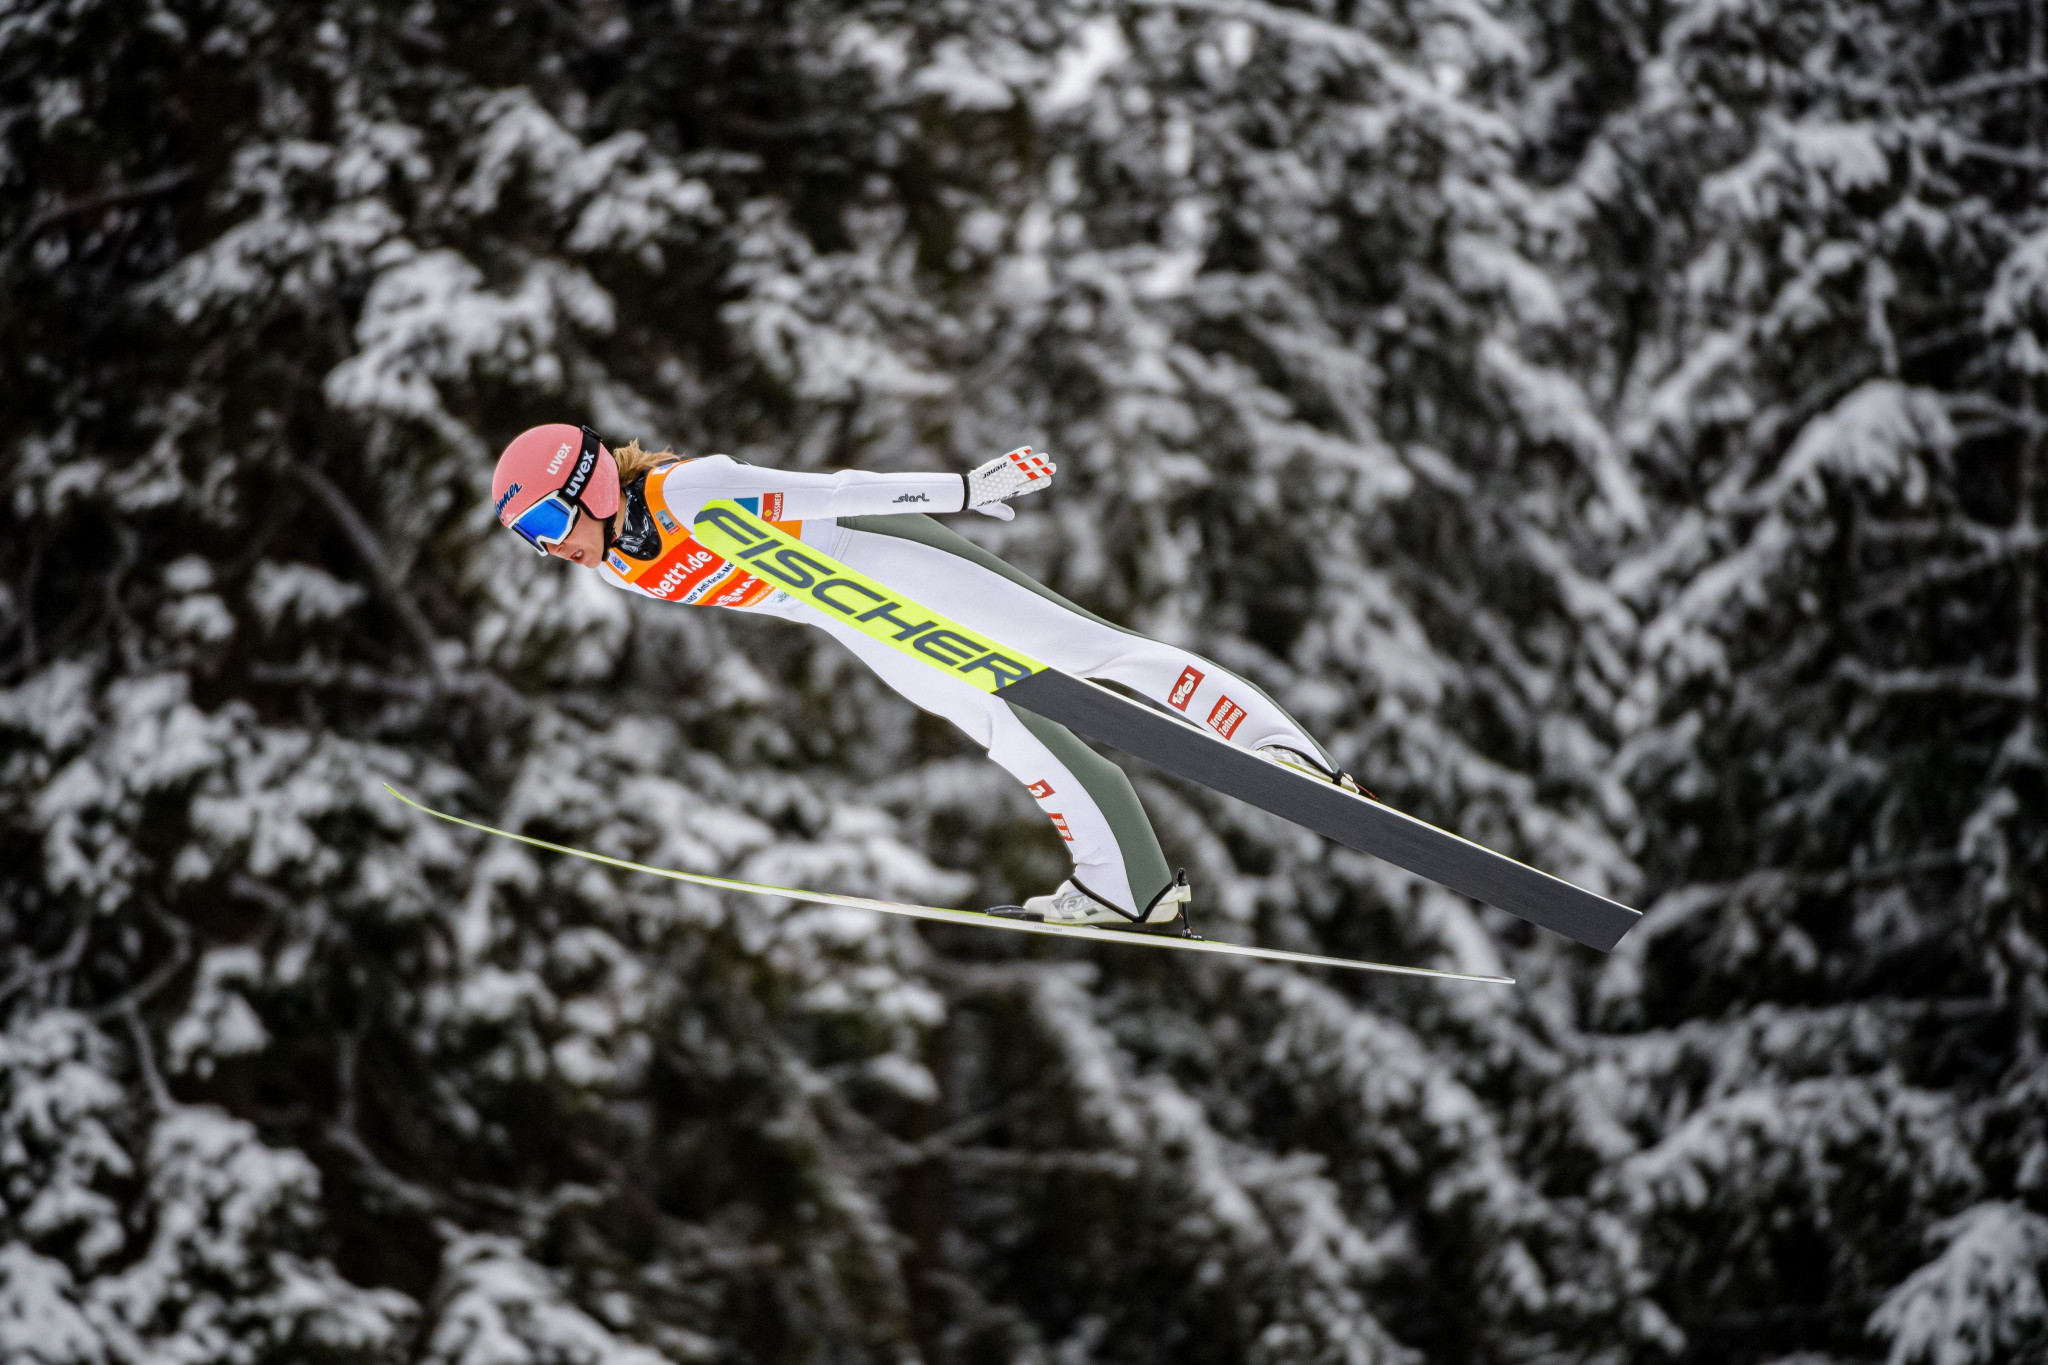 Kramer impresses again in qualification at FIS Ski Jumping World Cup in Ramsau